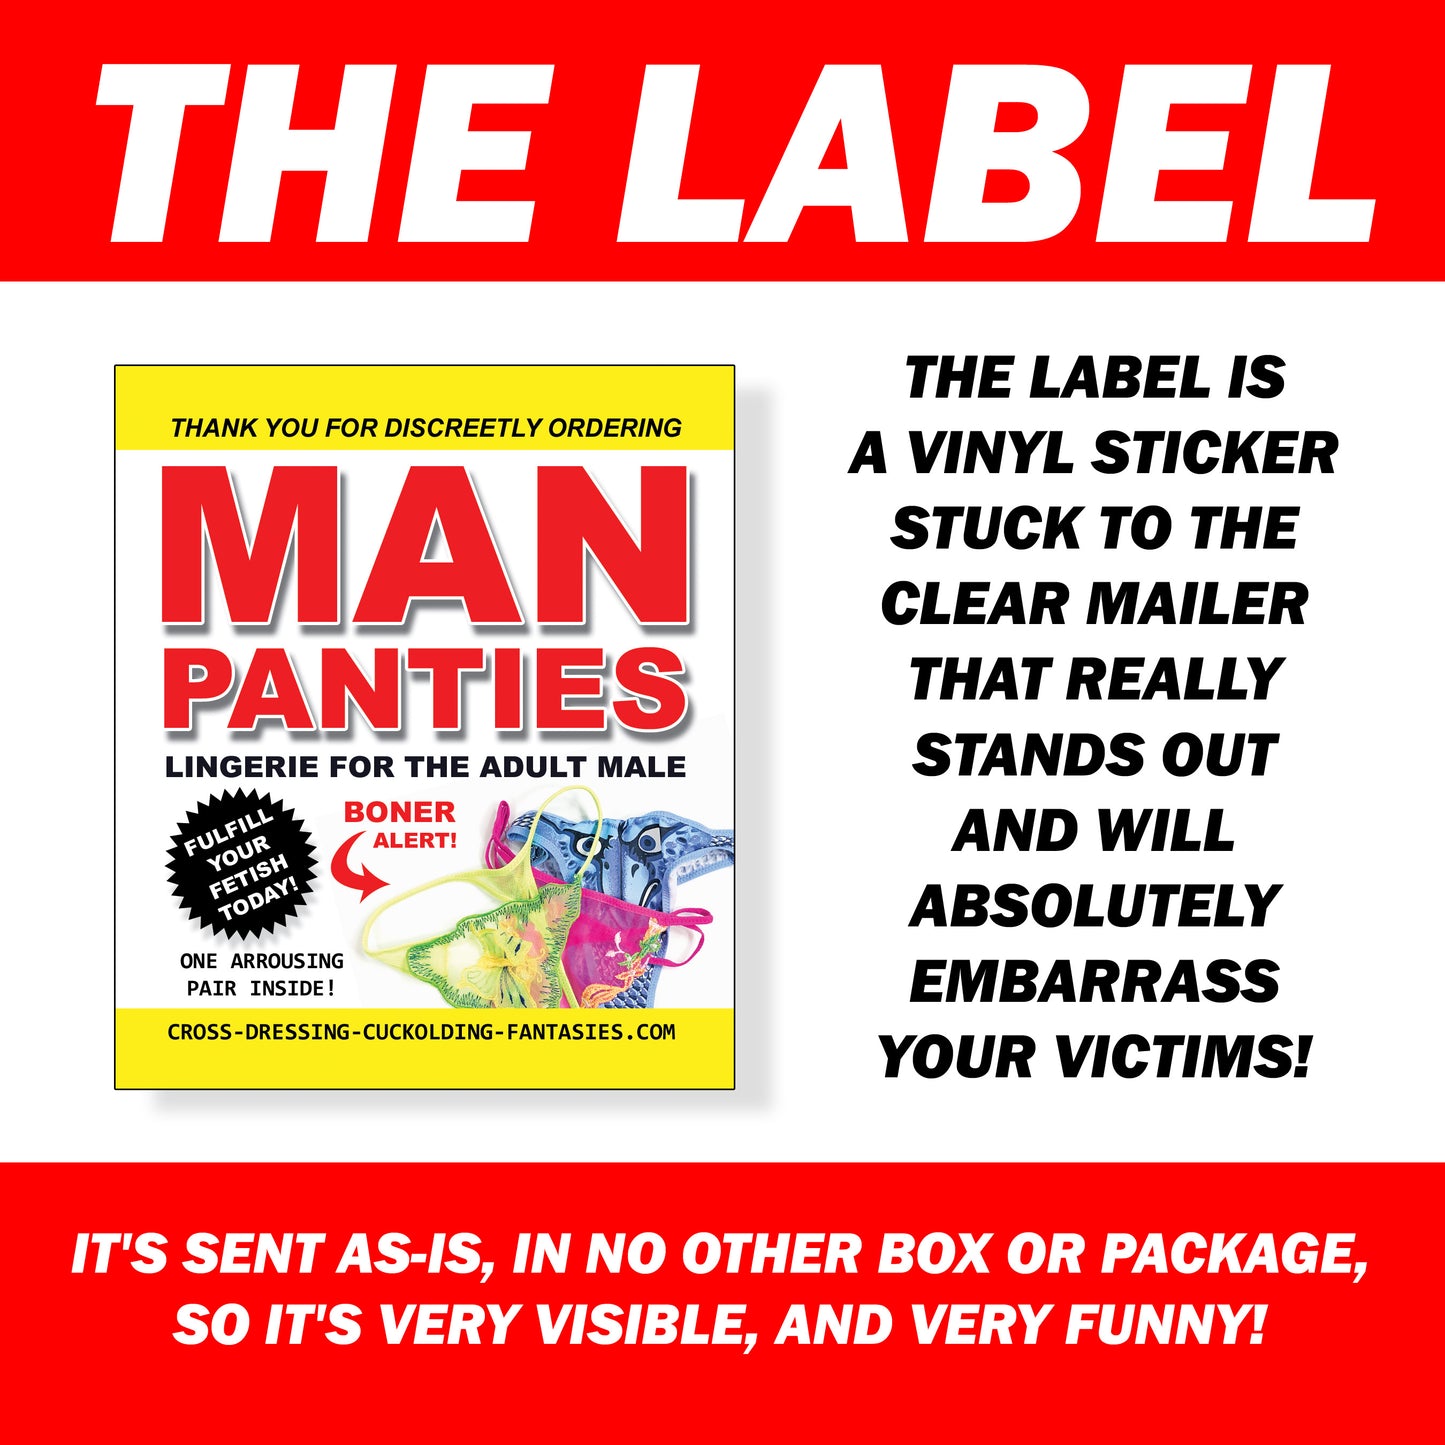 Man Panties embarrassing clear prank envelope gets mailed directly to your victims 100% anonymously!